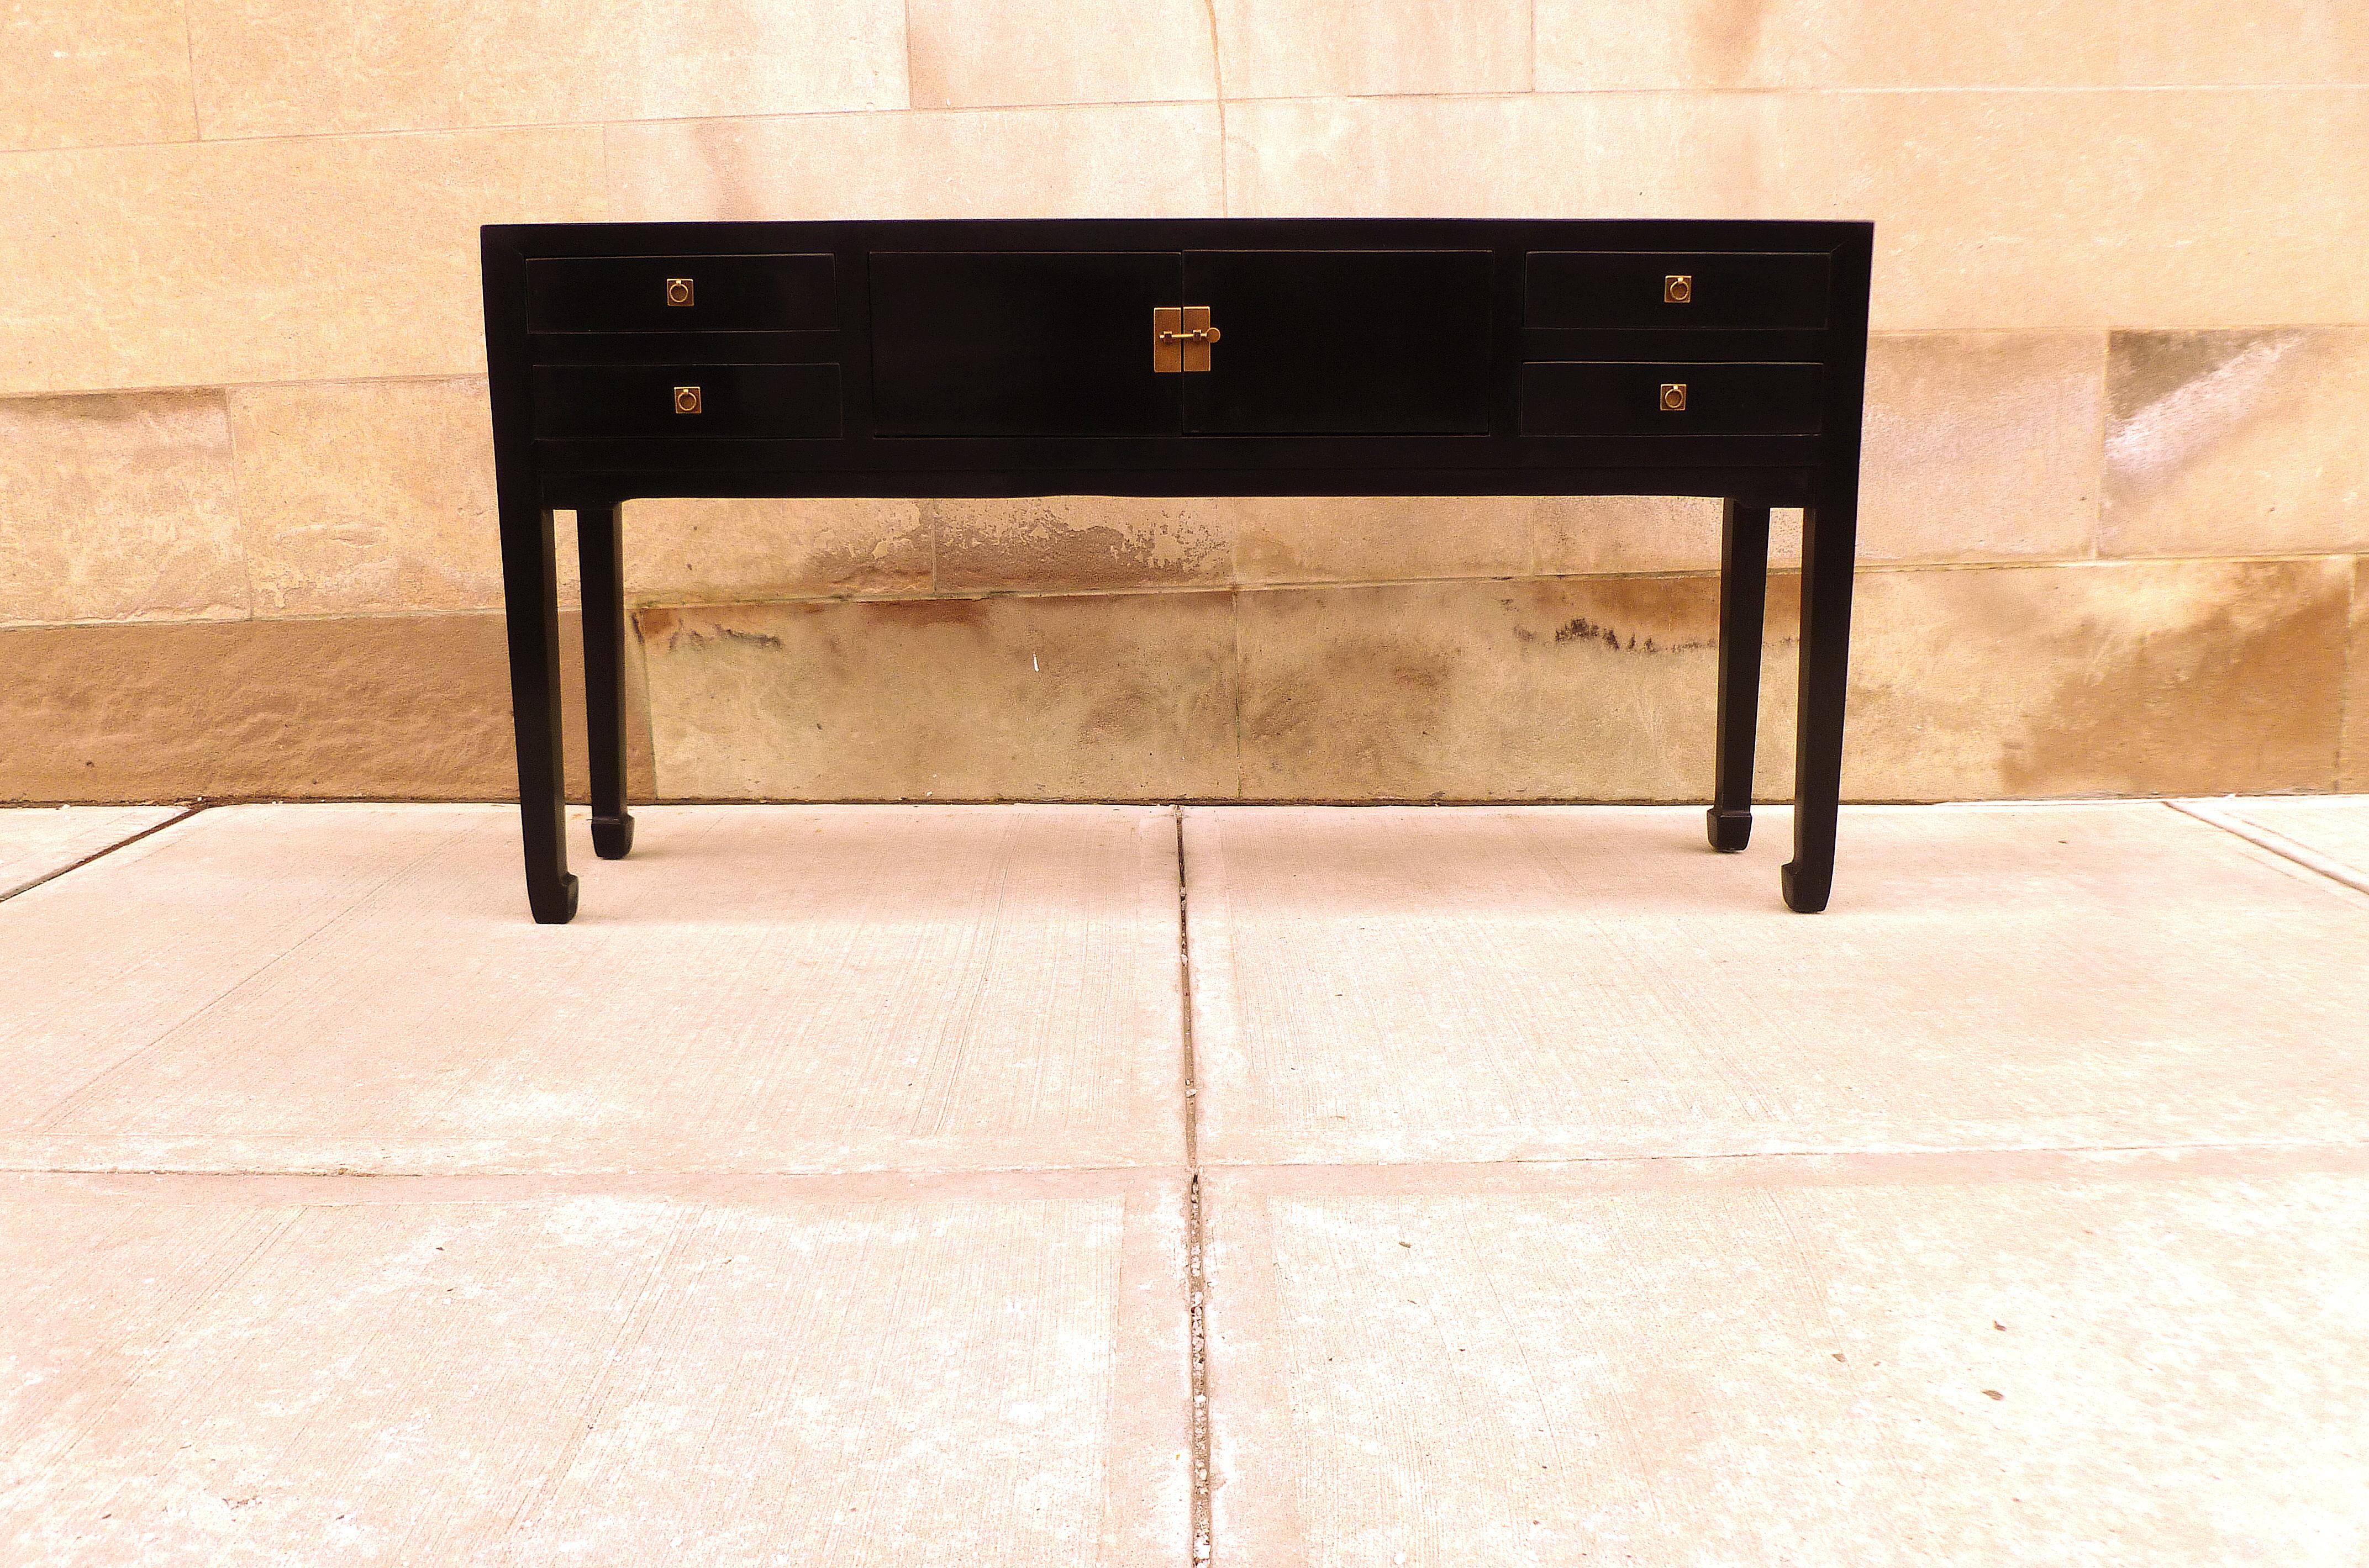 Fine black lacquer console table with four drawers and pair of doors. Very elegant and fine quality. Beautiful color and simple form. We carry fine quality furniture with elegant finished and has been appeared many times in 